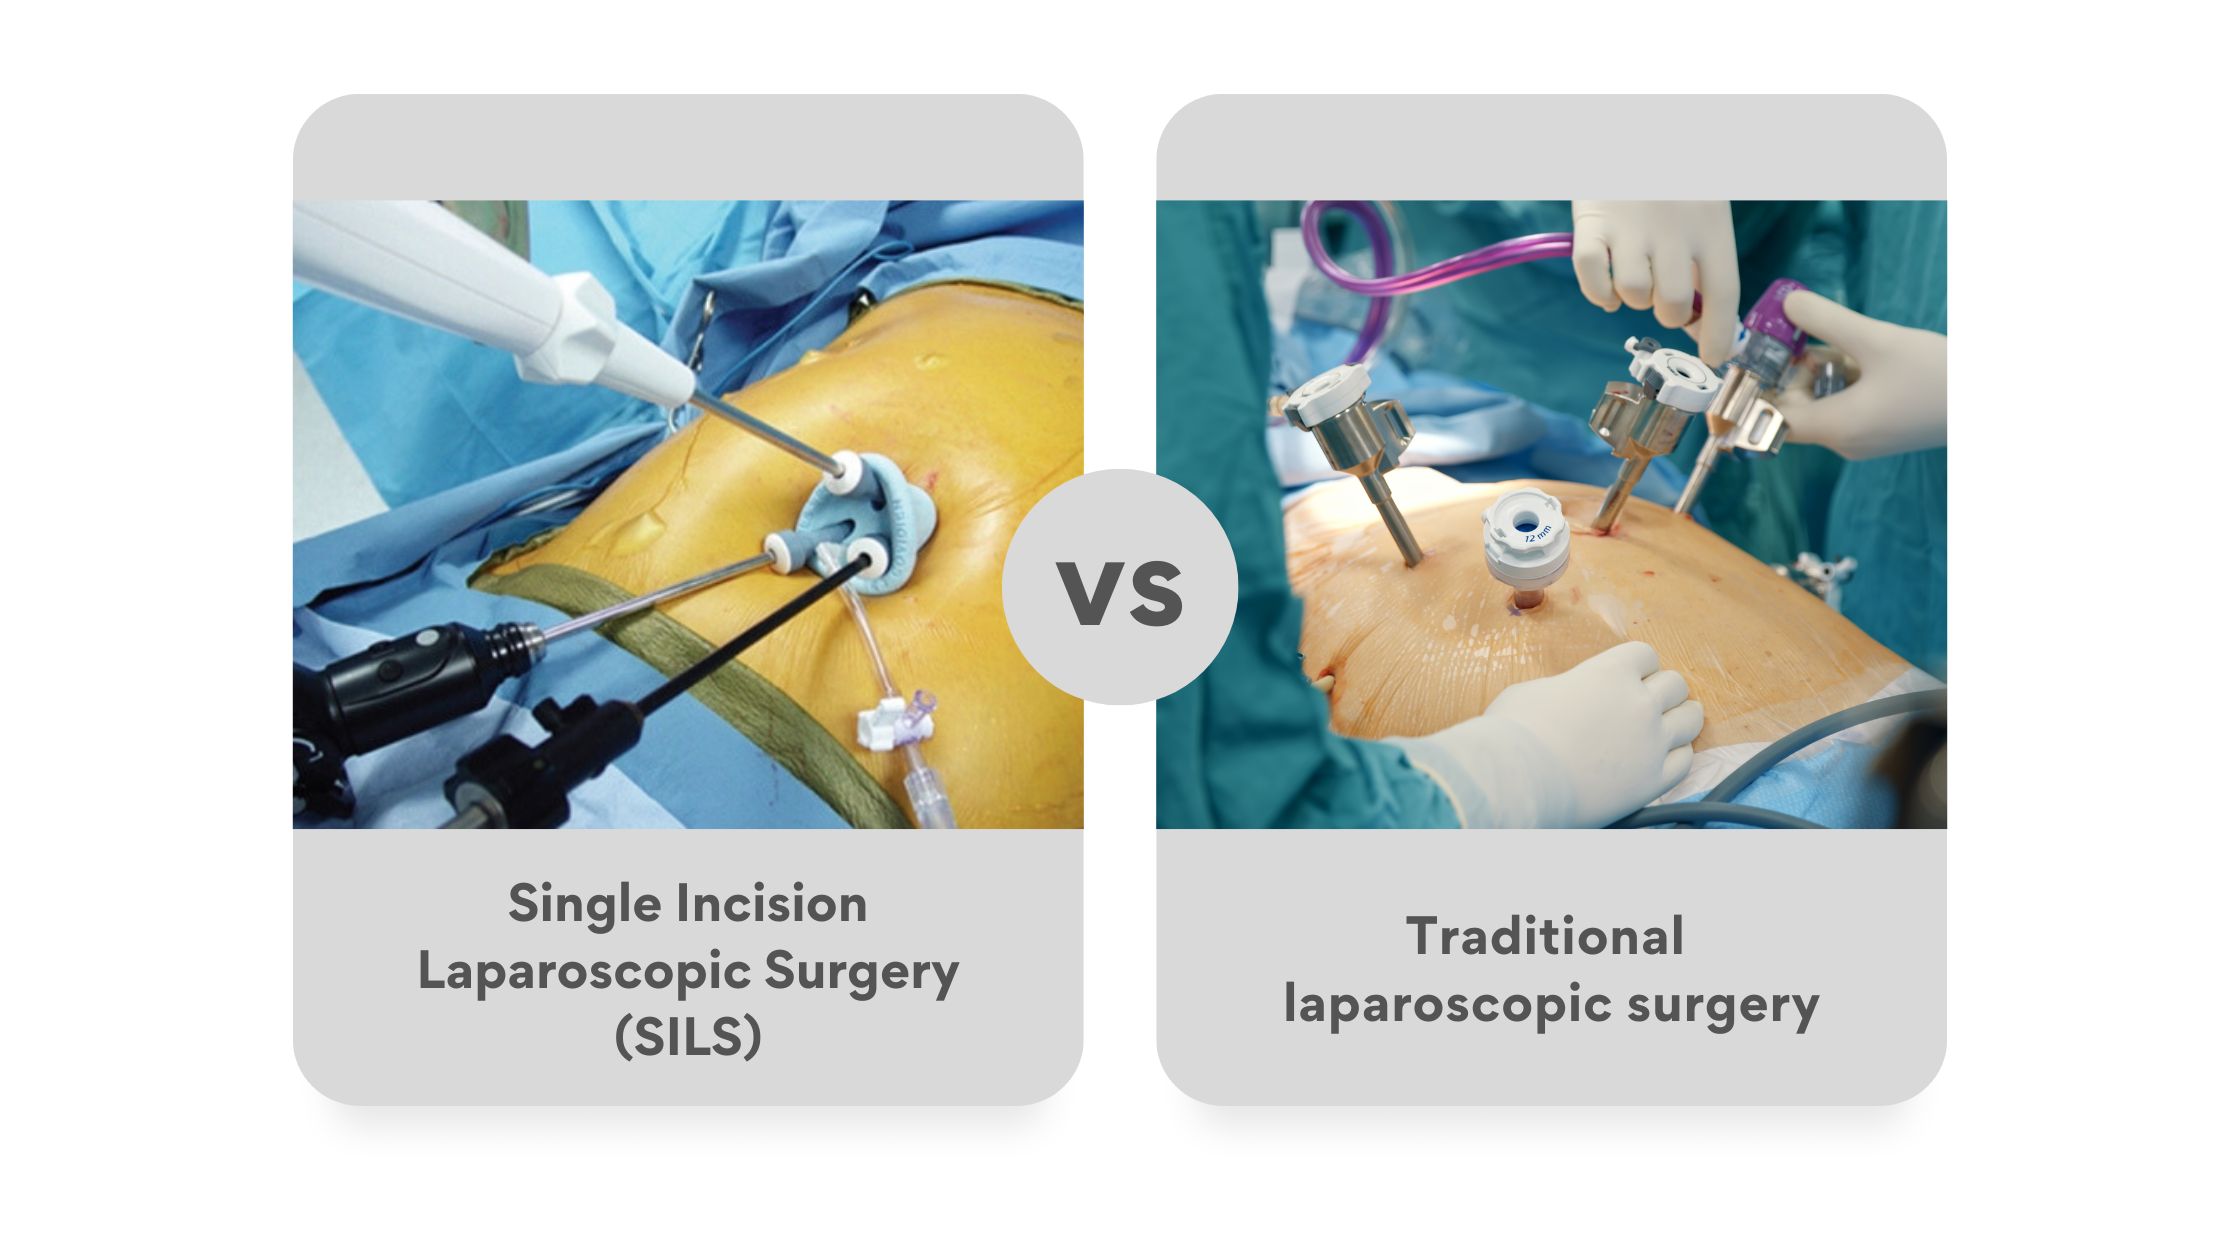 Differences between Single Incision Laparoscopic Surgery (SILS) and traditional laparoscopic surgery